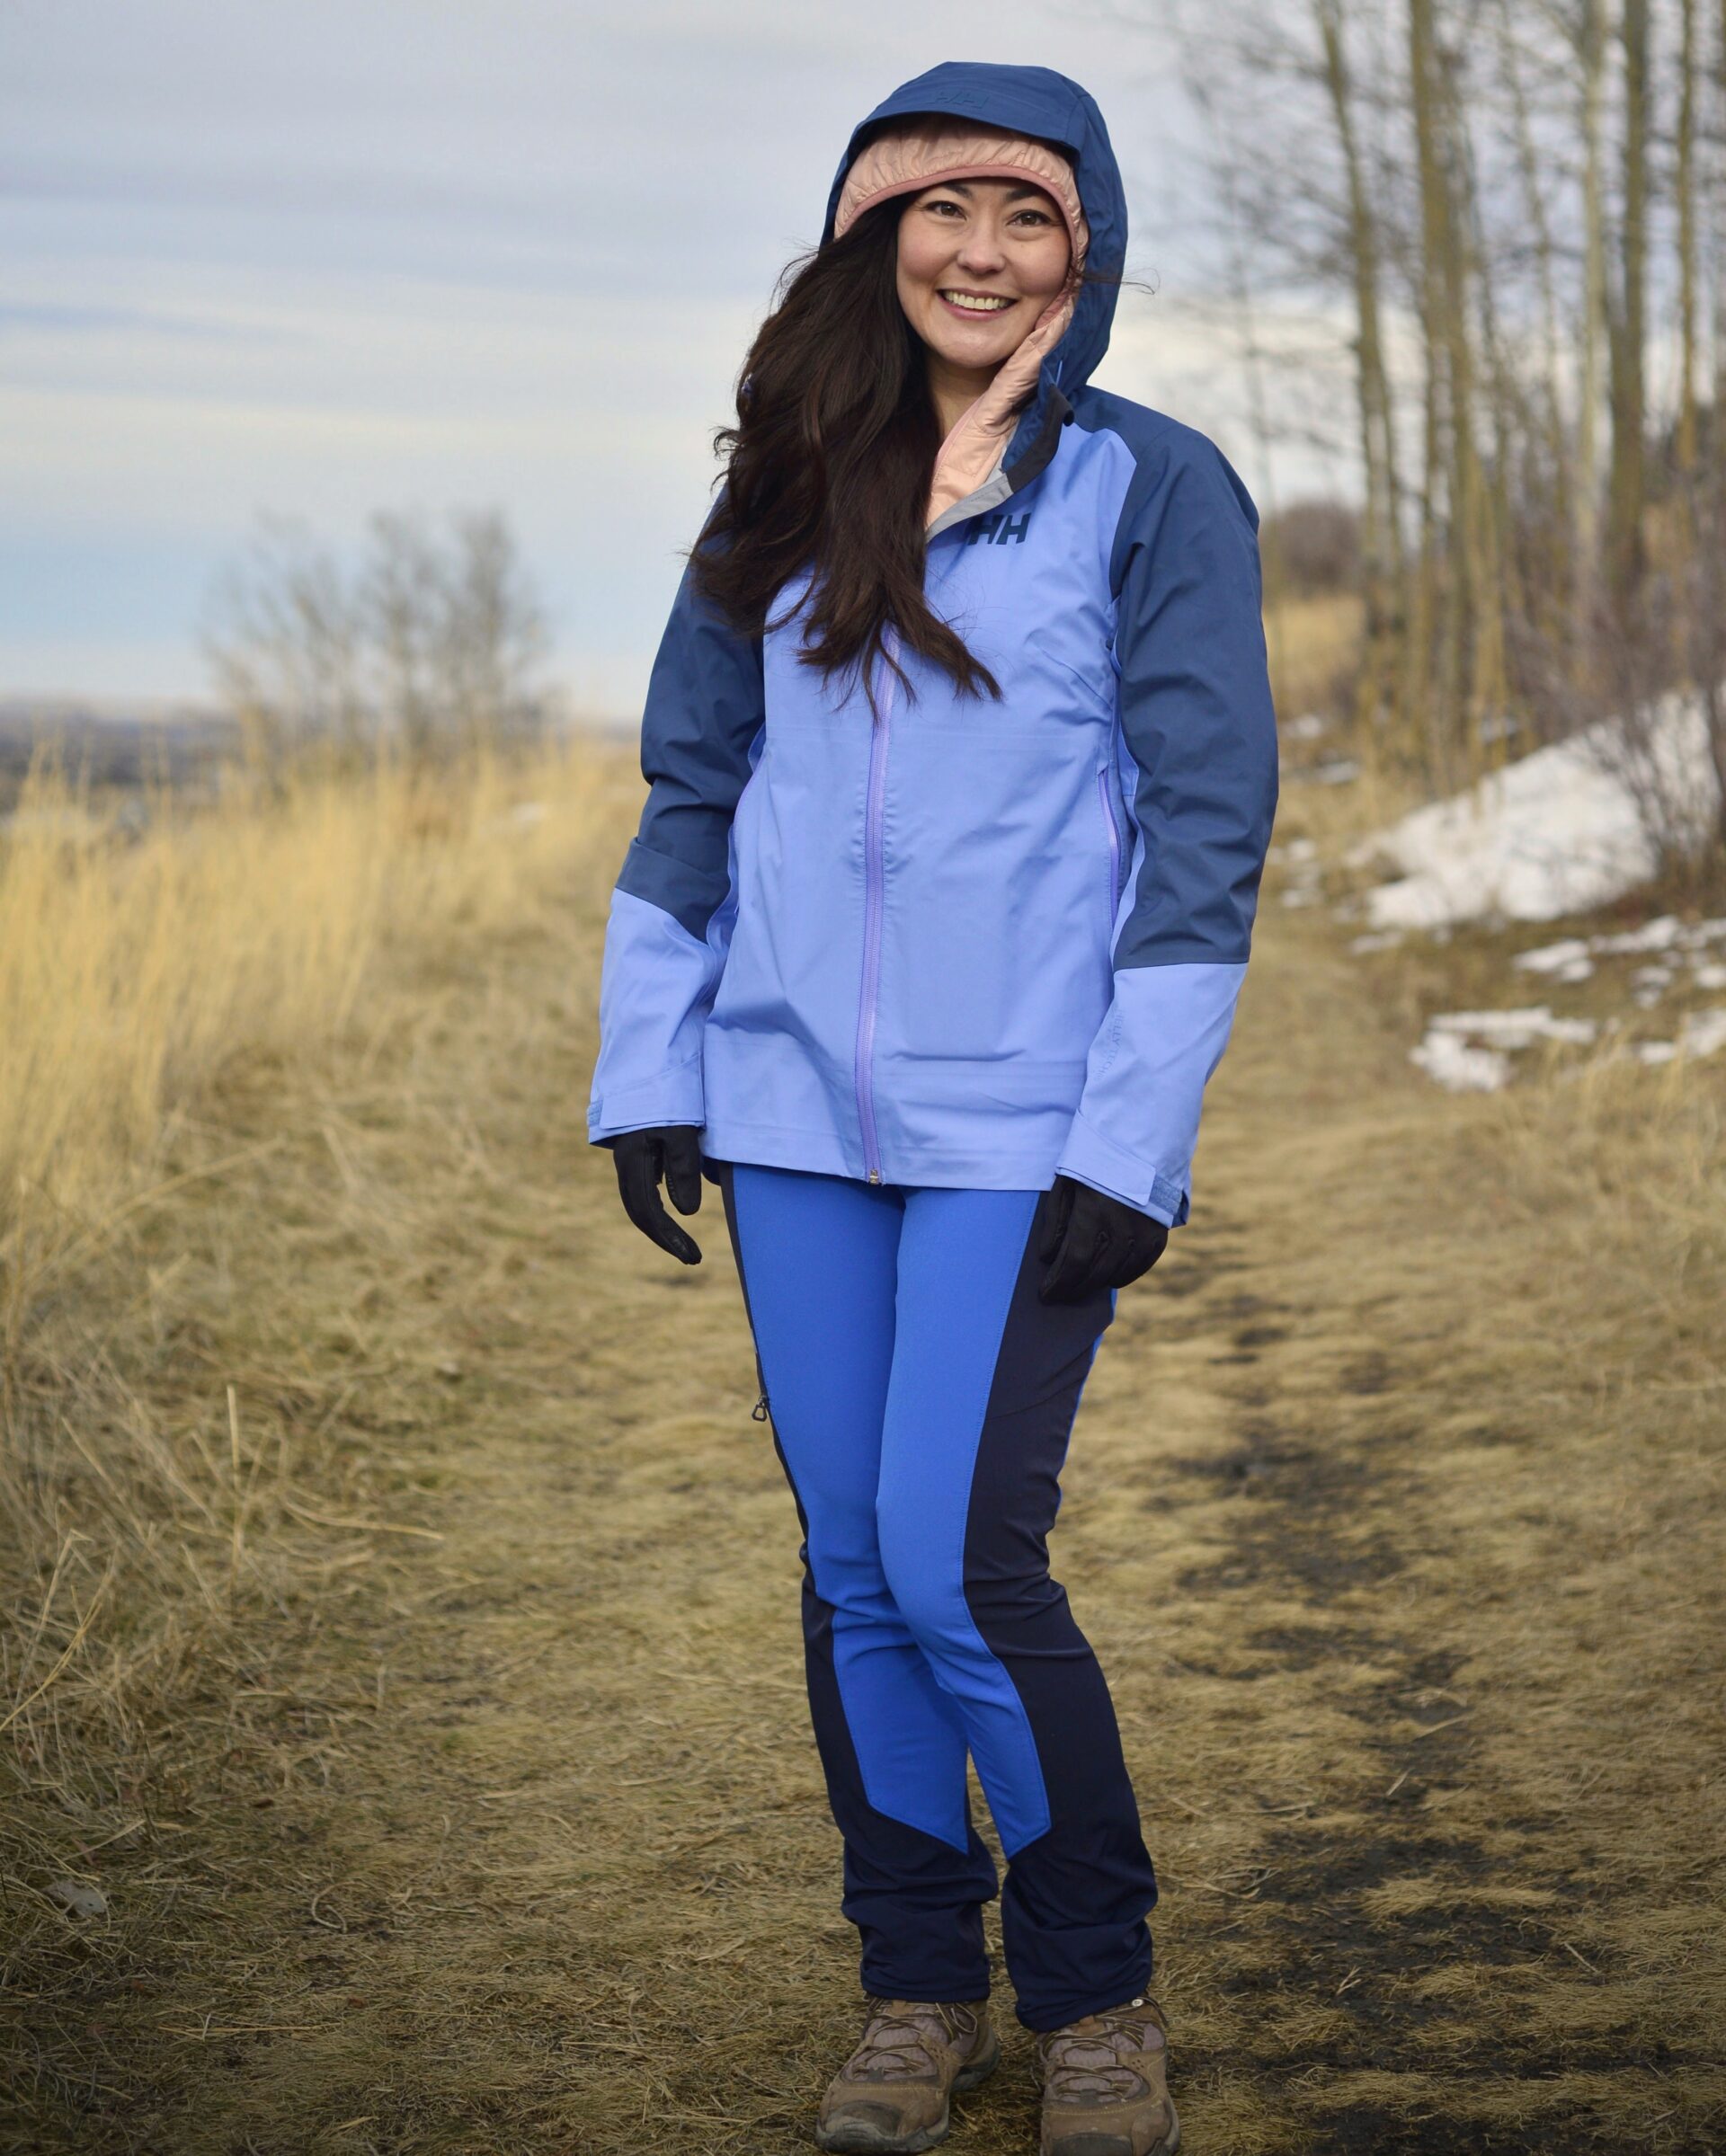 Stay warm and dry on the trails with Helly Hansen: Verglas 3L Shell ...